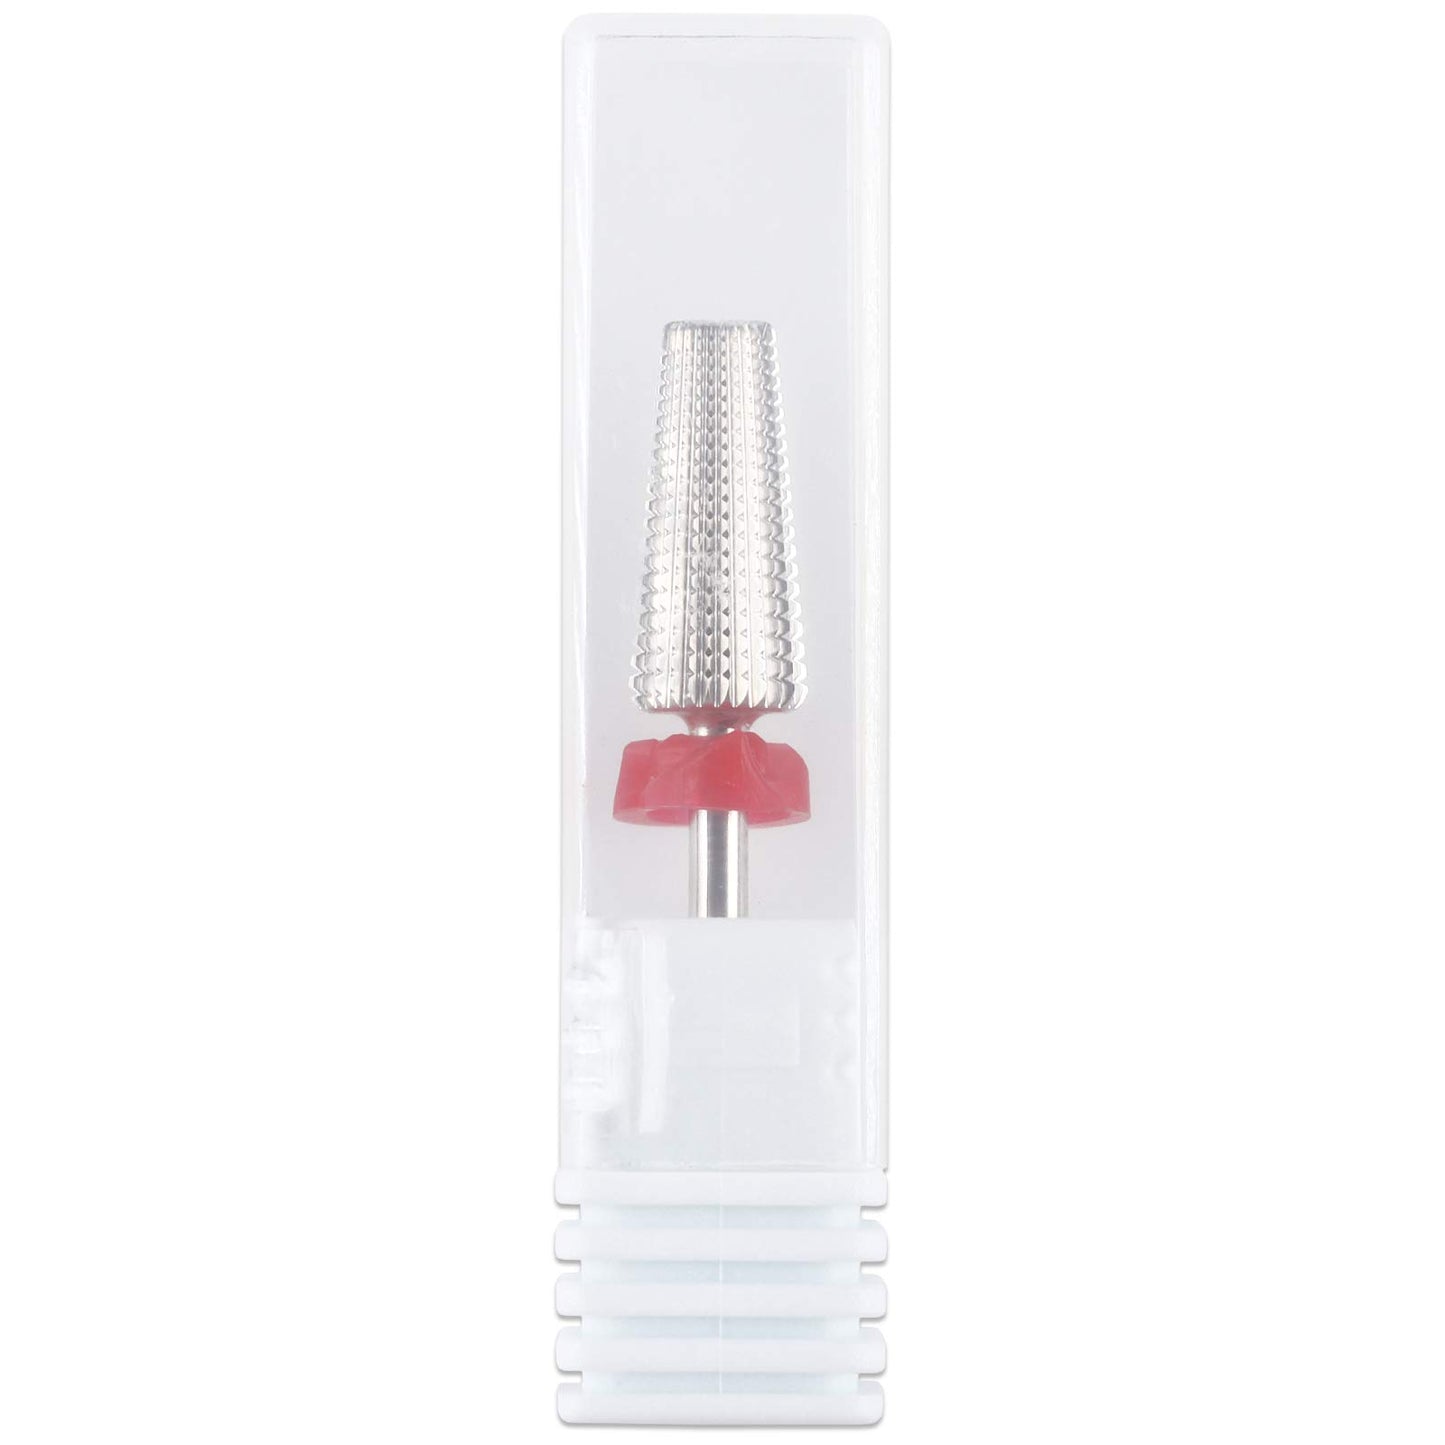 PANA Nail Carbide 5 in 1 Bit - Two Way Rotate use for Both Left and Right Handed - Fast remove Acrylic or Hard Gel - 3/32" Shank - Manicure, Nail Art, Drill Machine (Fine, Silver)